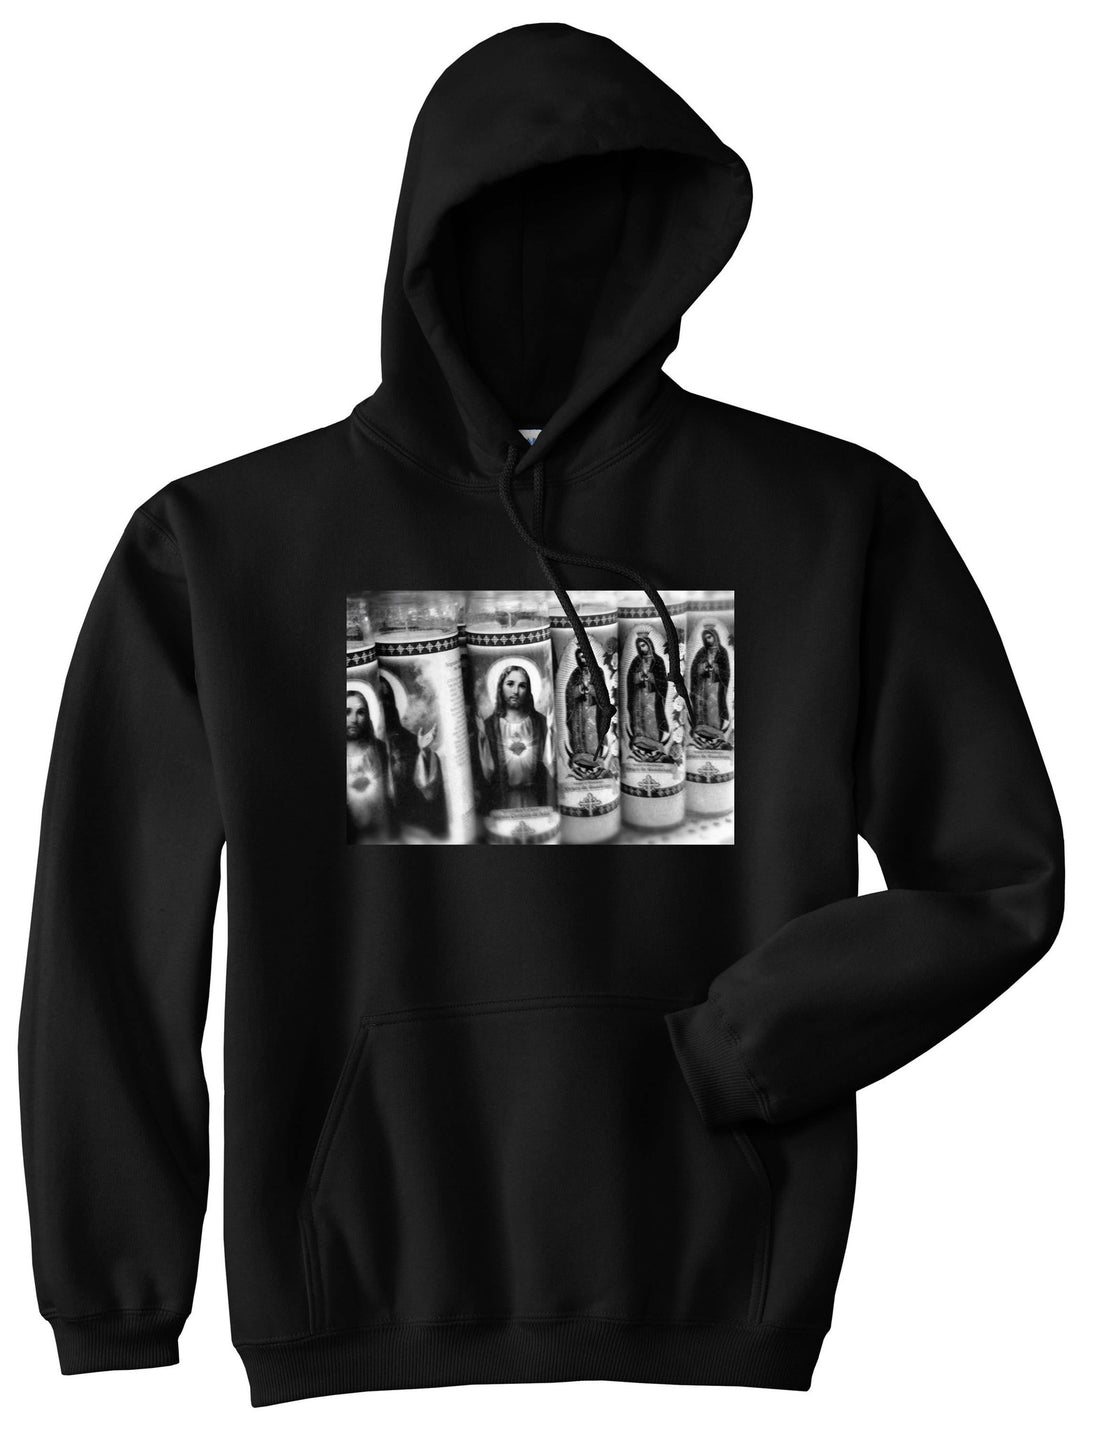 Candles Religious God Jesus Mary Fire NYC Boys Kids Pullover Hoodie Hoody In Black by Kings Of NY